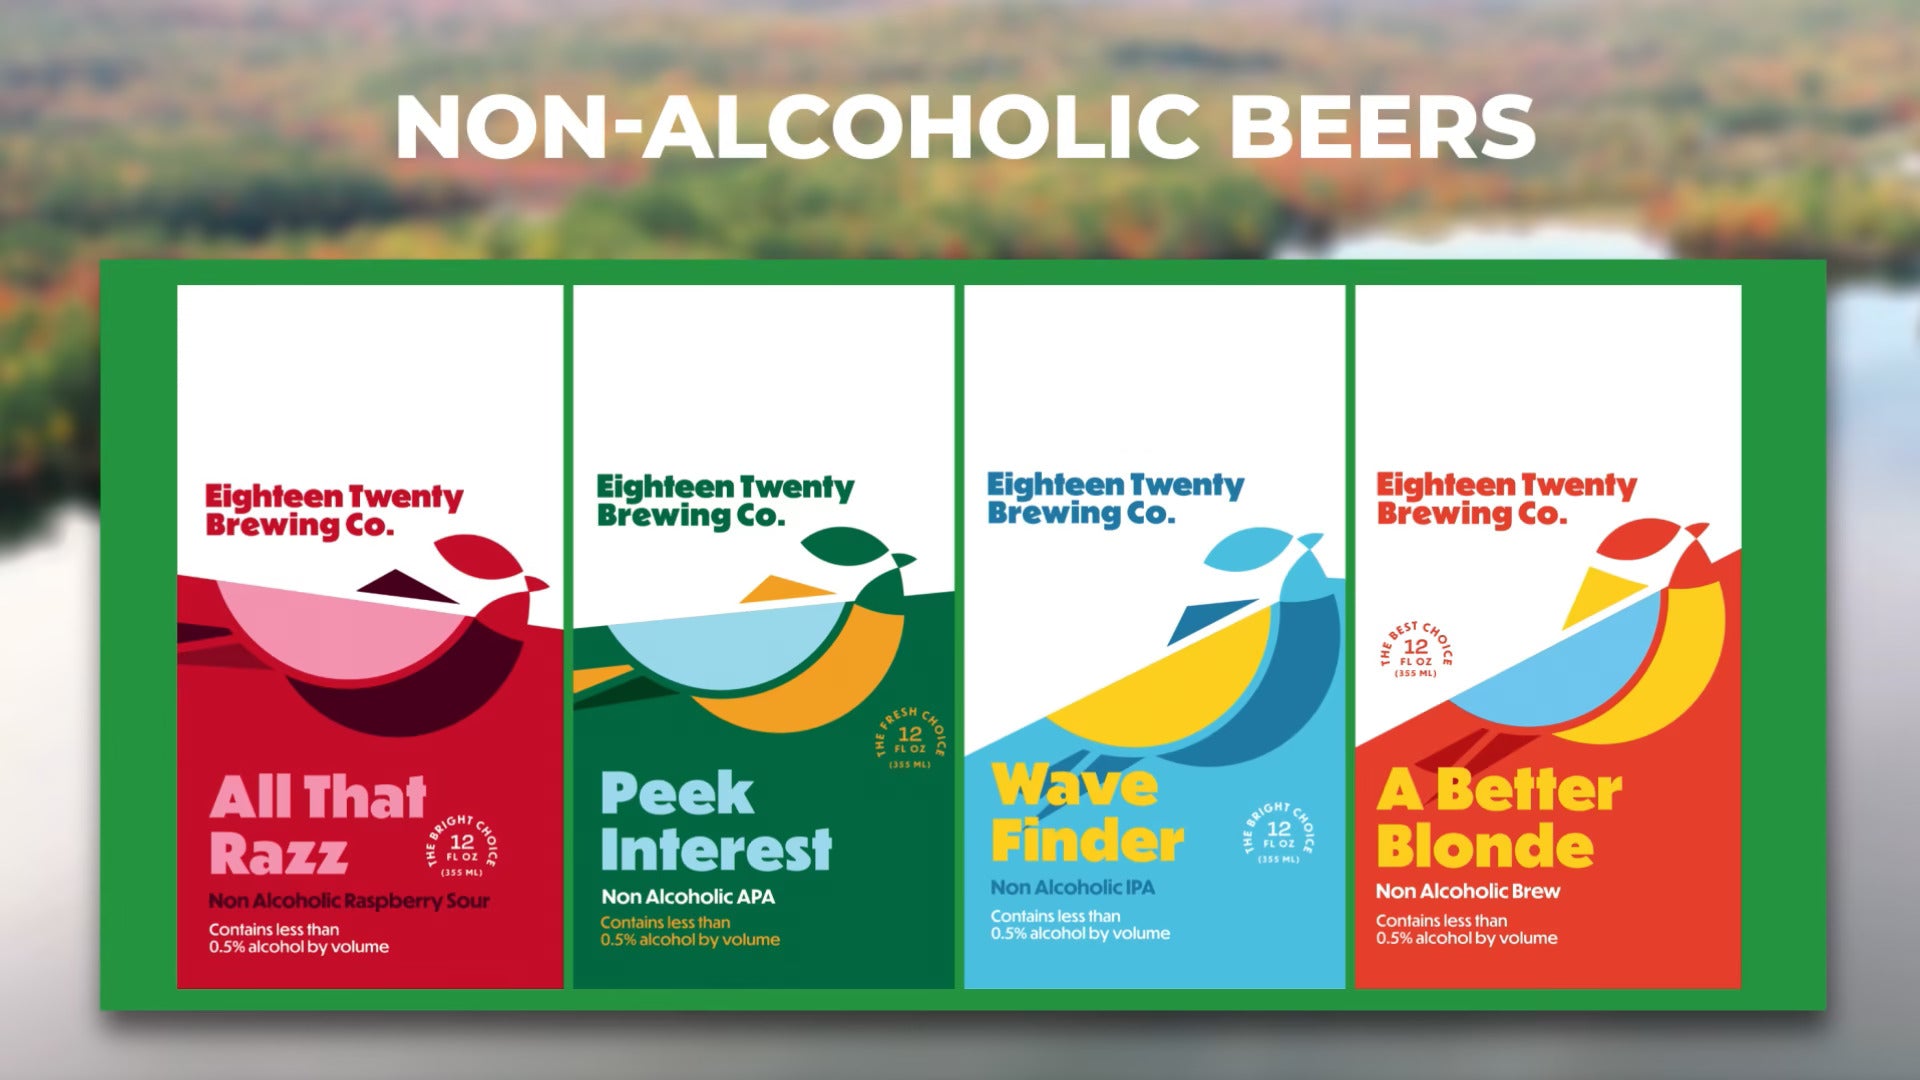 Load video: Try our variety of delicious non-alcoholic beers!